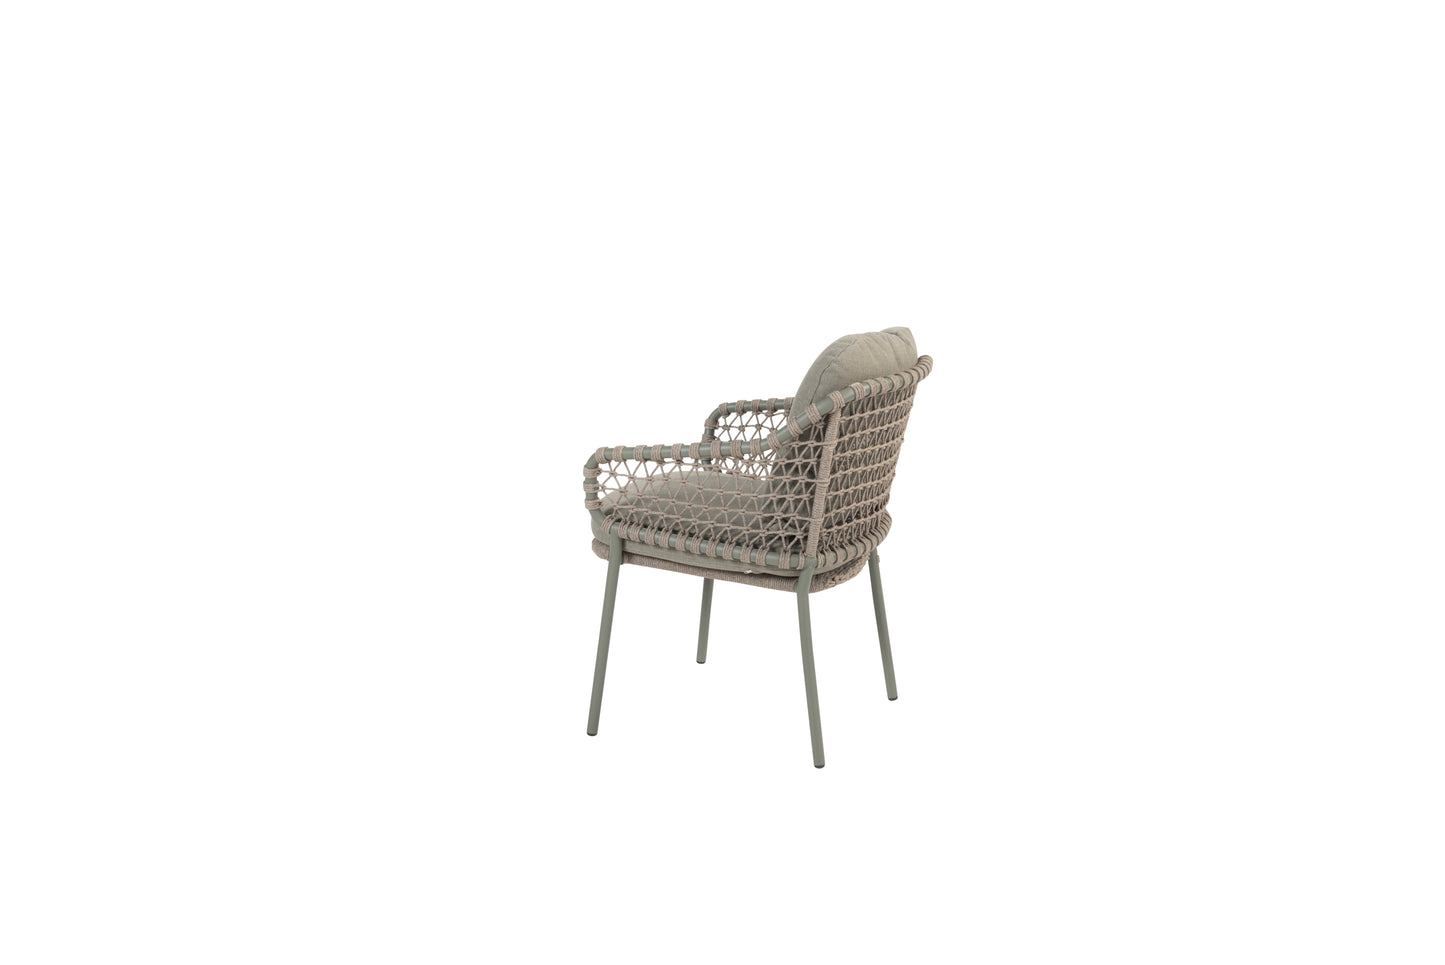 Jura Stacking Dining Chair